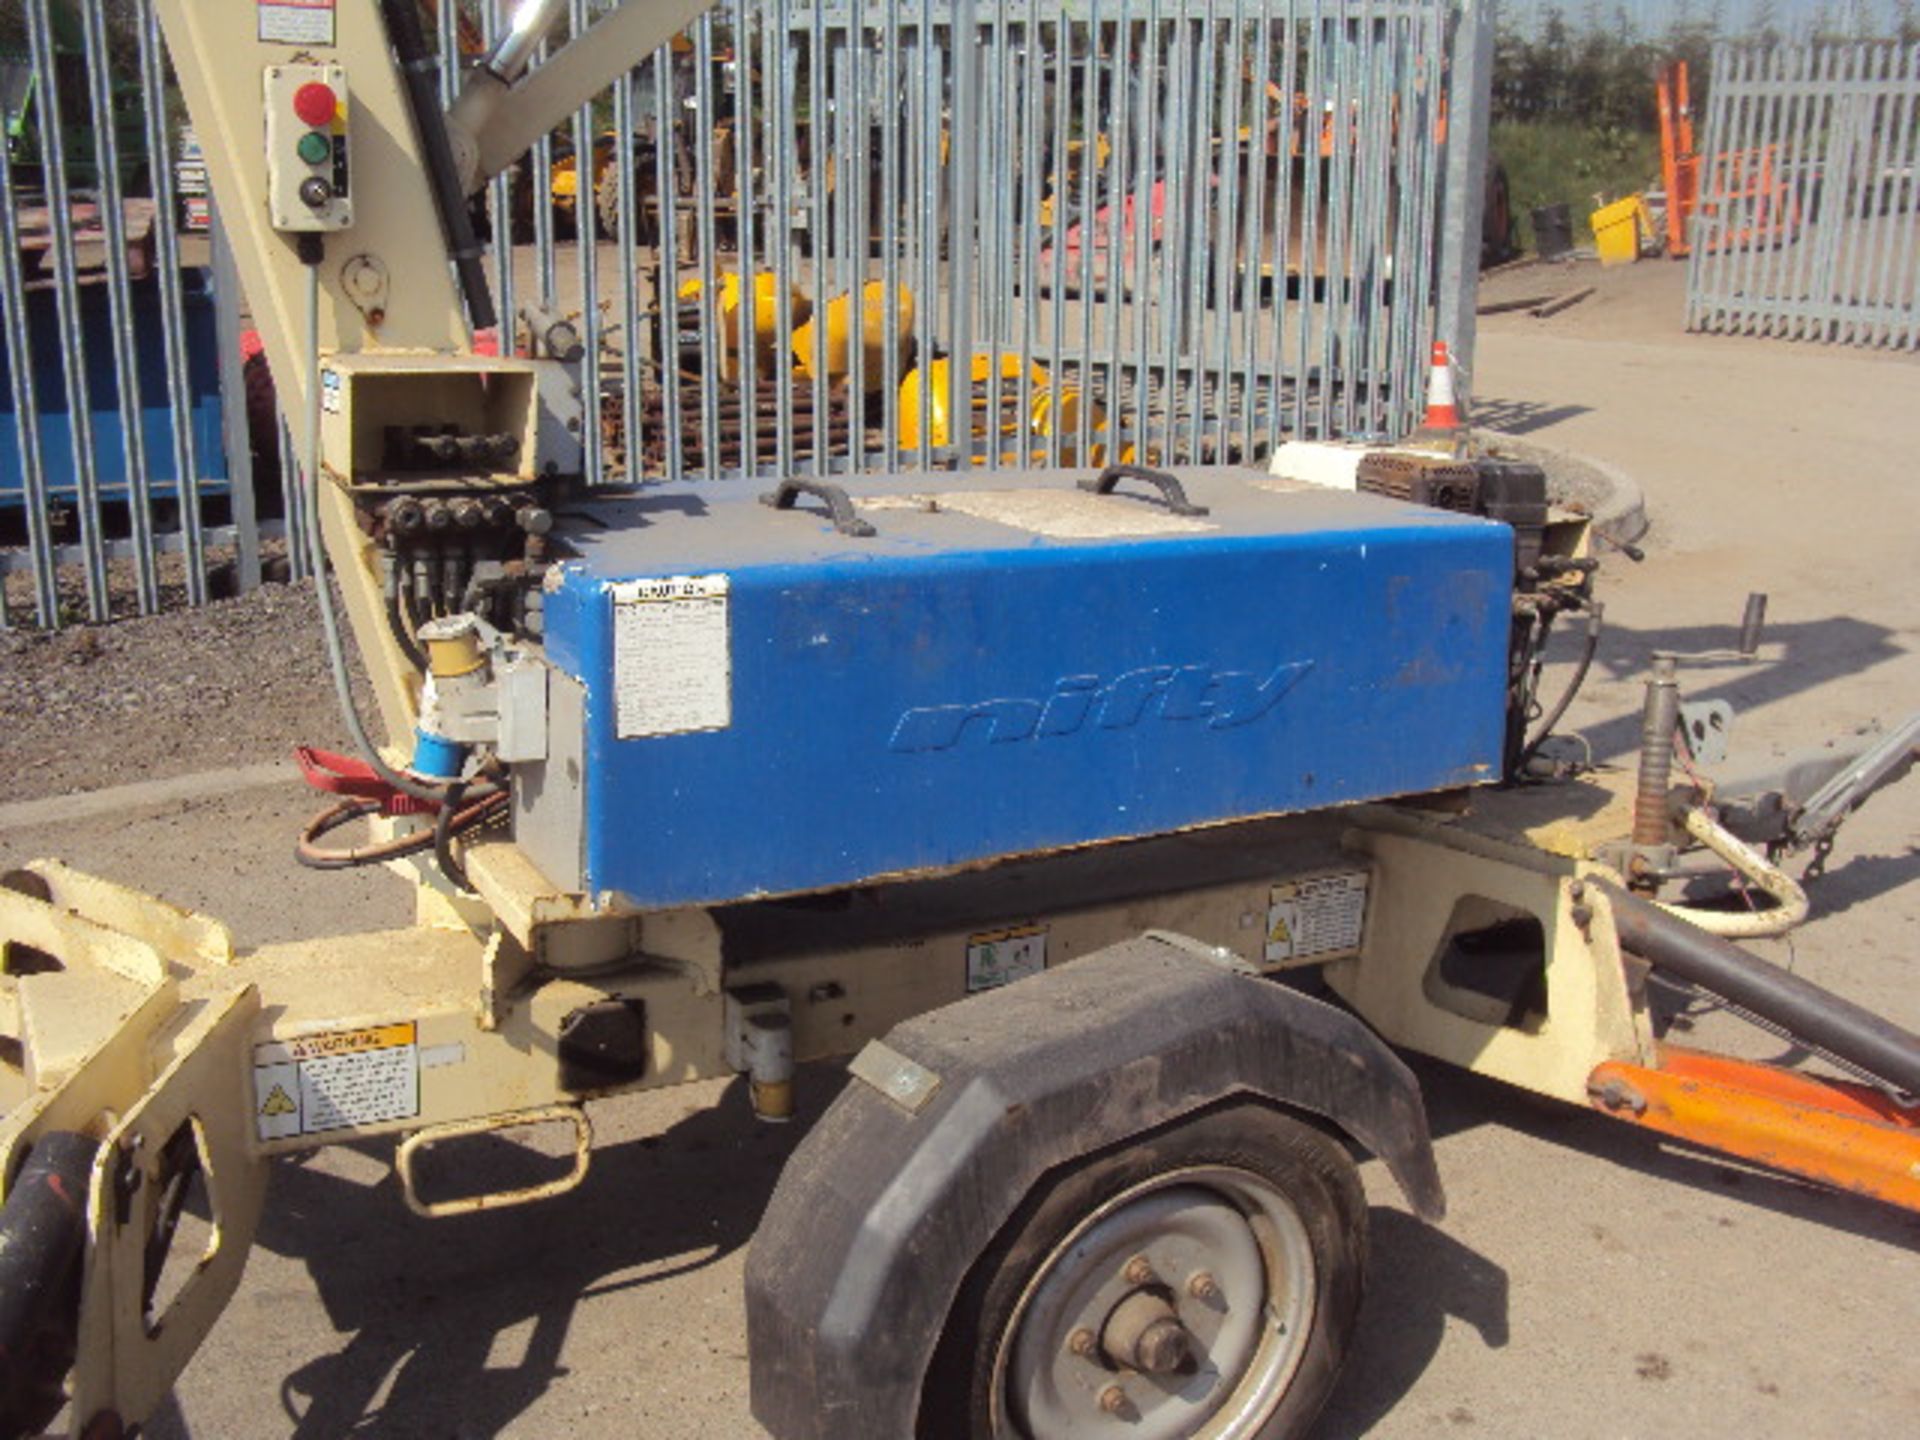 2006 NIFTY 120TPE cherry picker c/w battery & engine (S/n 12475)(Runs) - Image 8 of 9